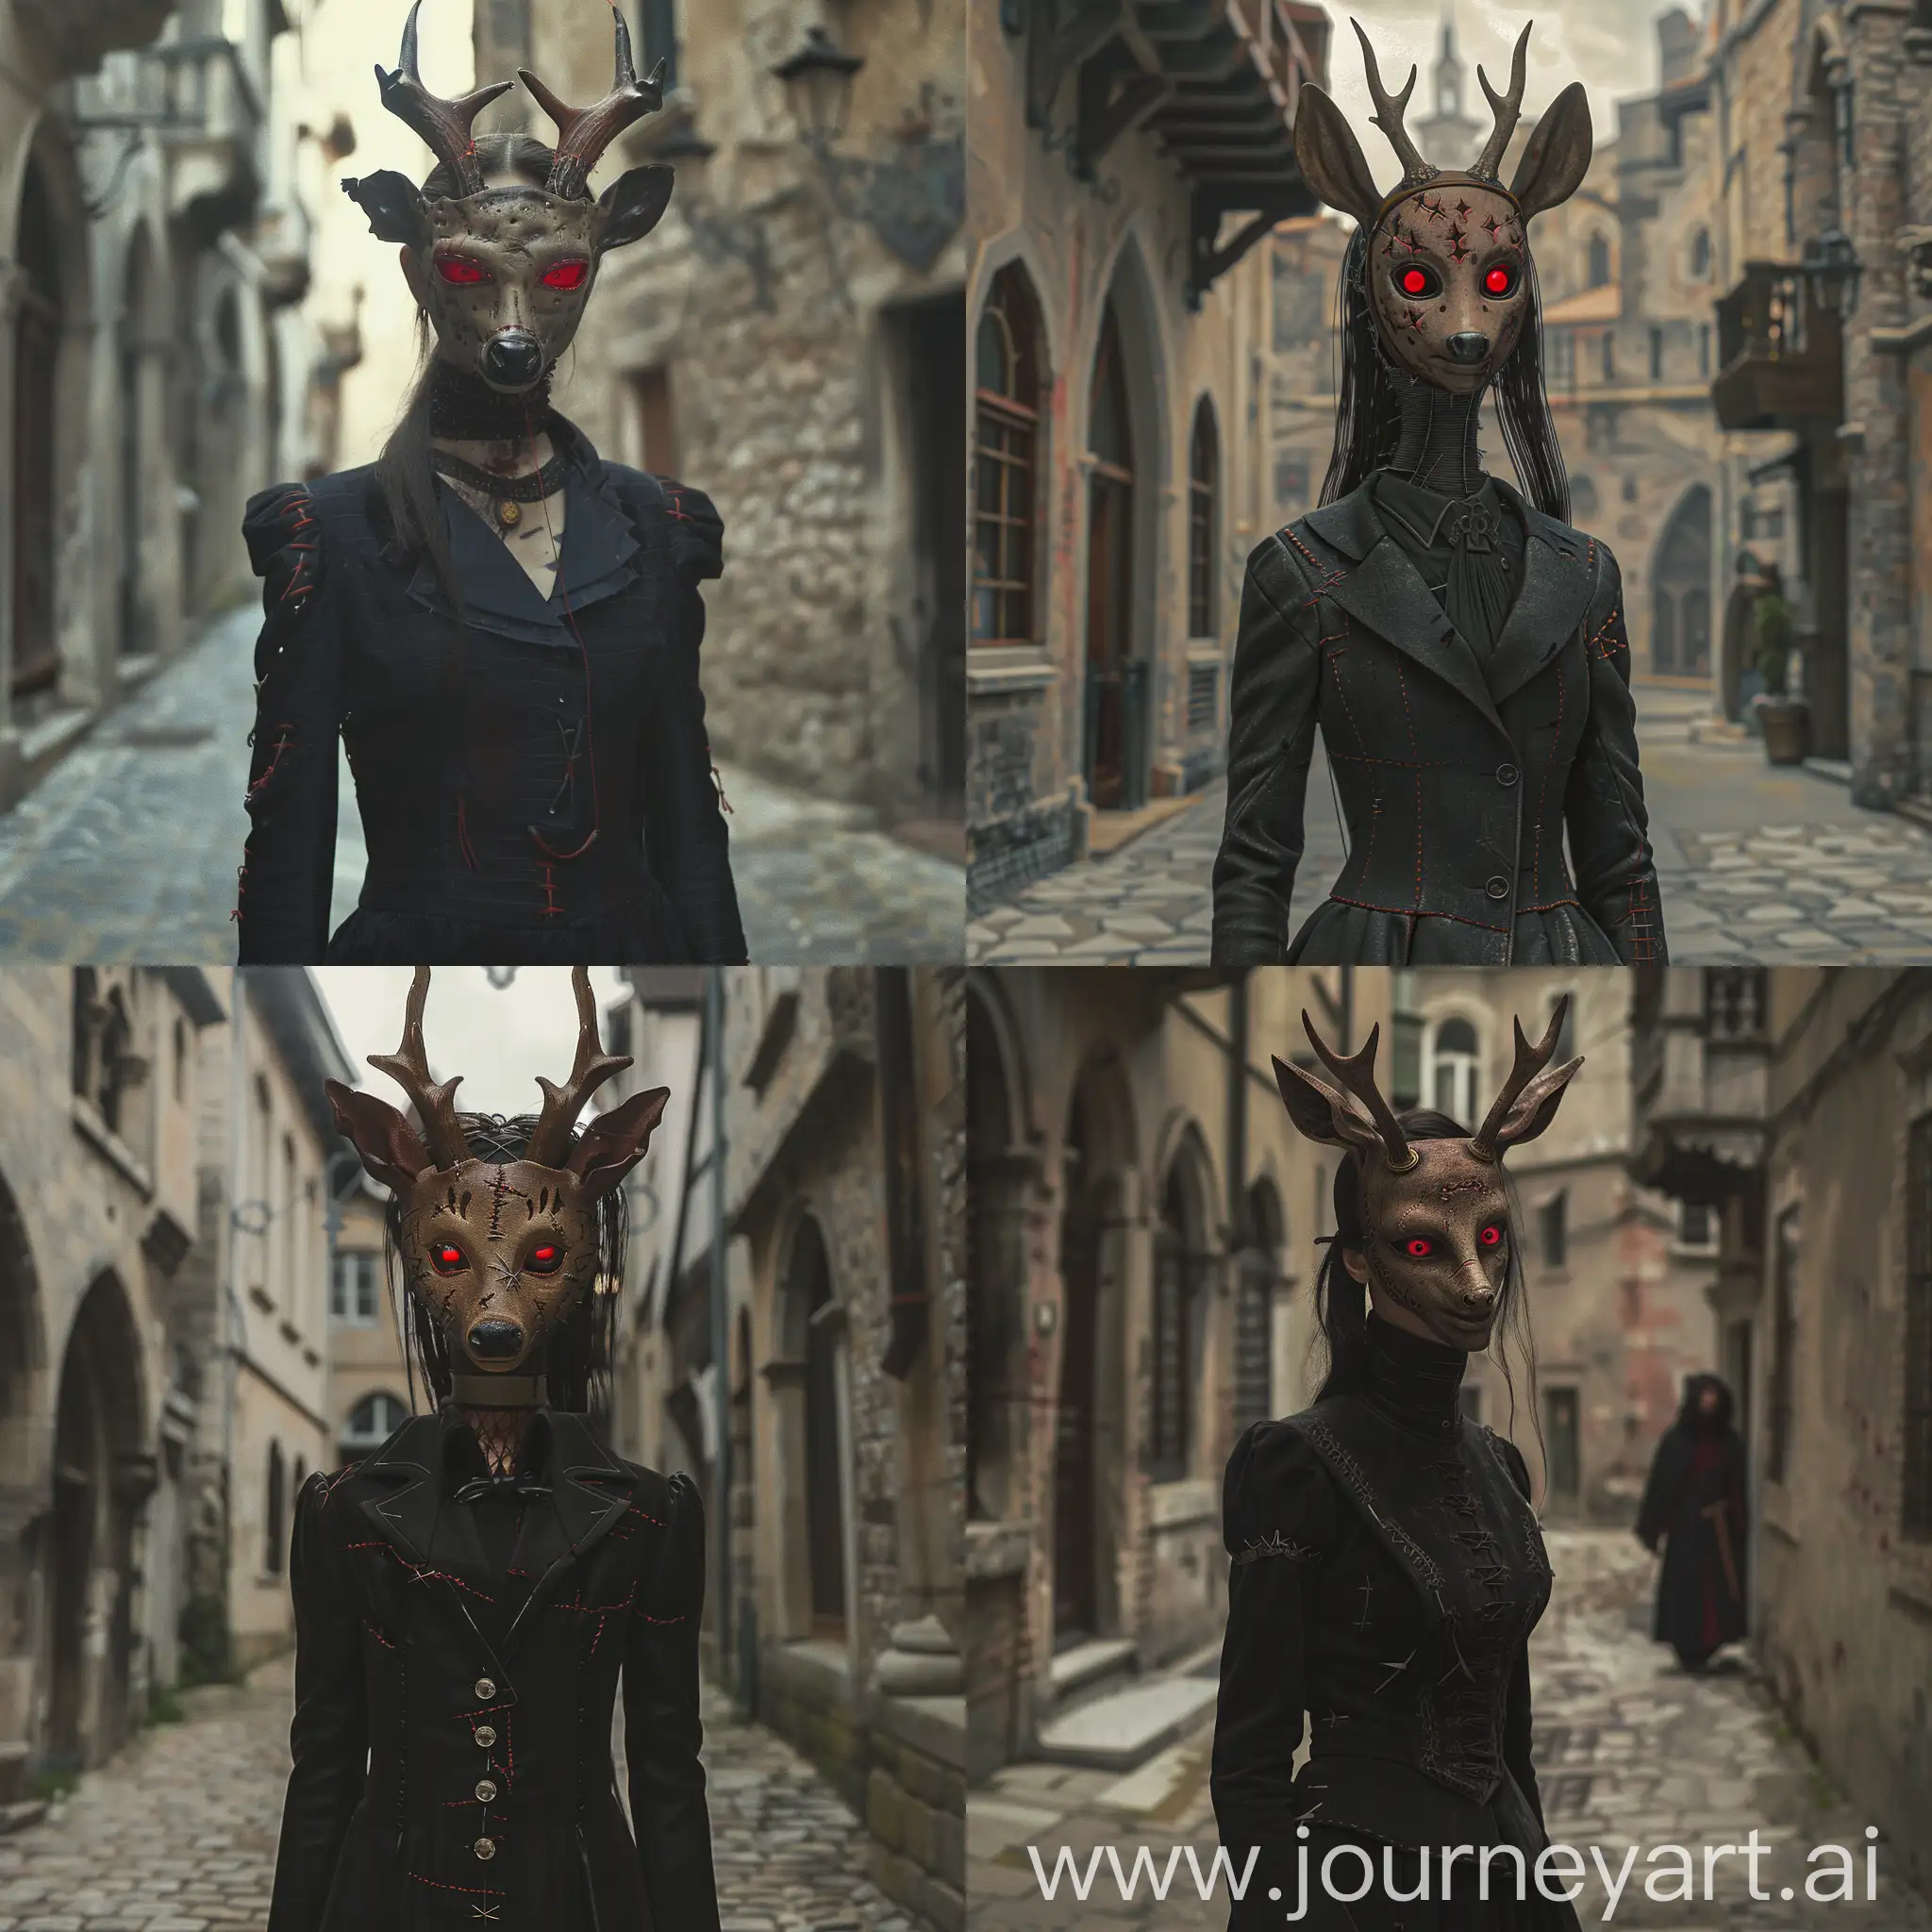 Monk-with-Deer-Mask-in-Medieval-City-Dark-Aristocratic-Figure-with-Scars-and-Stitches